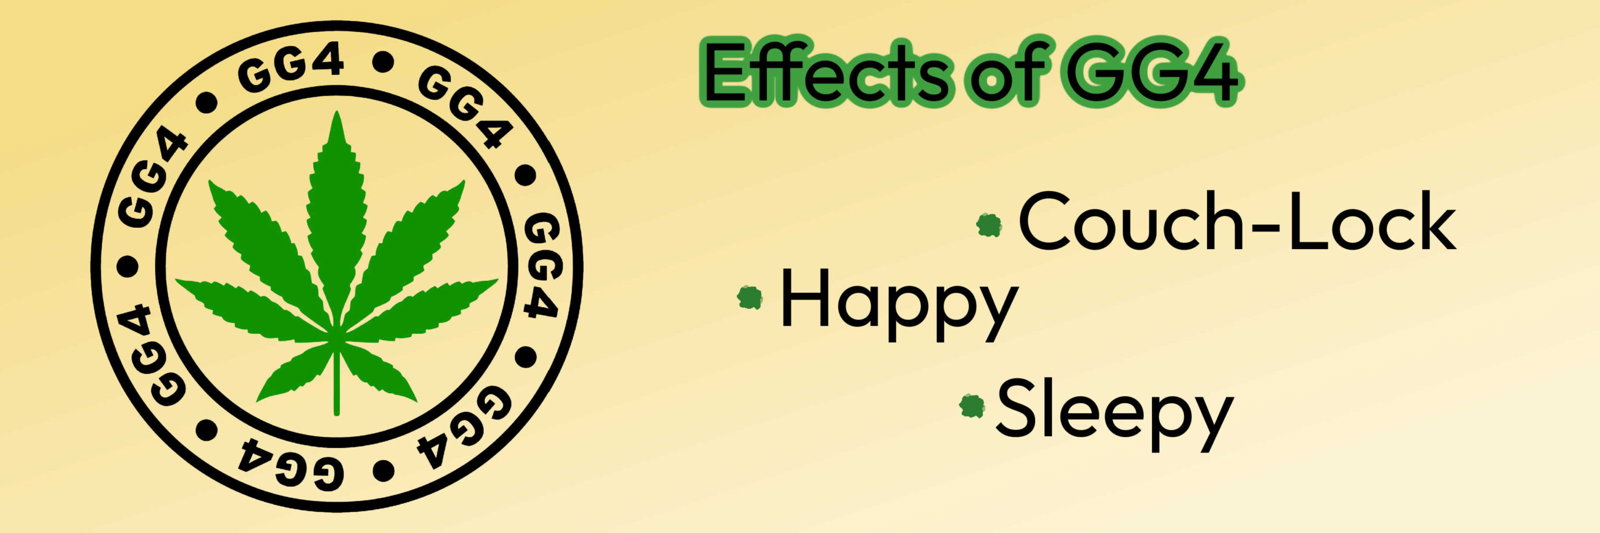 image of gg4 effects